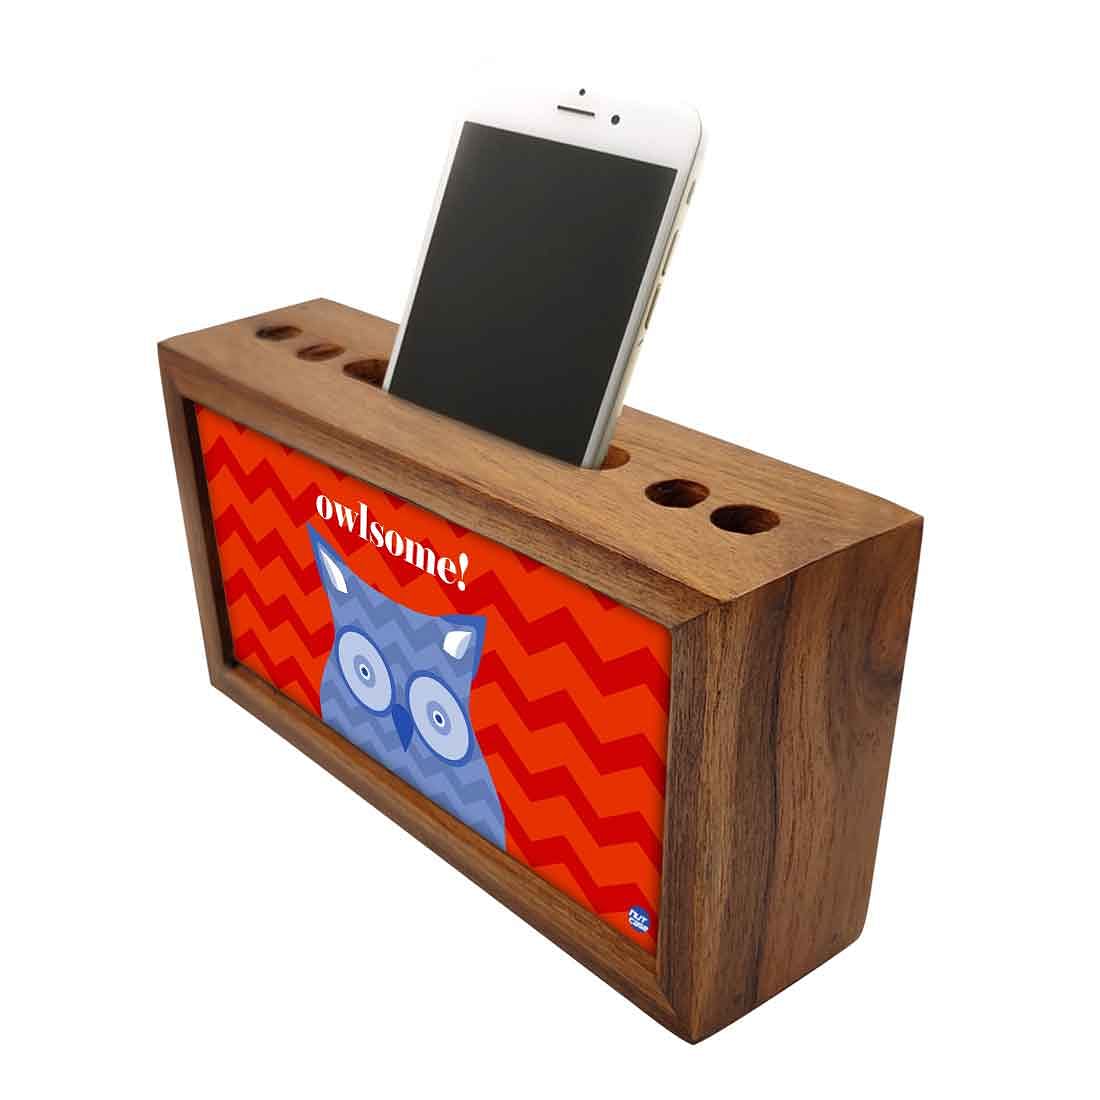 Wooden stationery organizer Pen Mobile Stand - Owlsome Nutcase